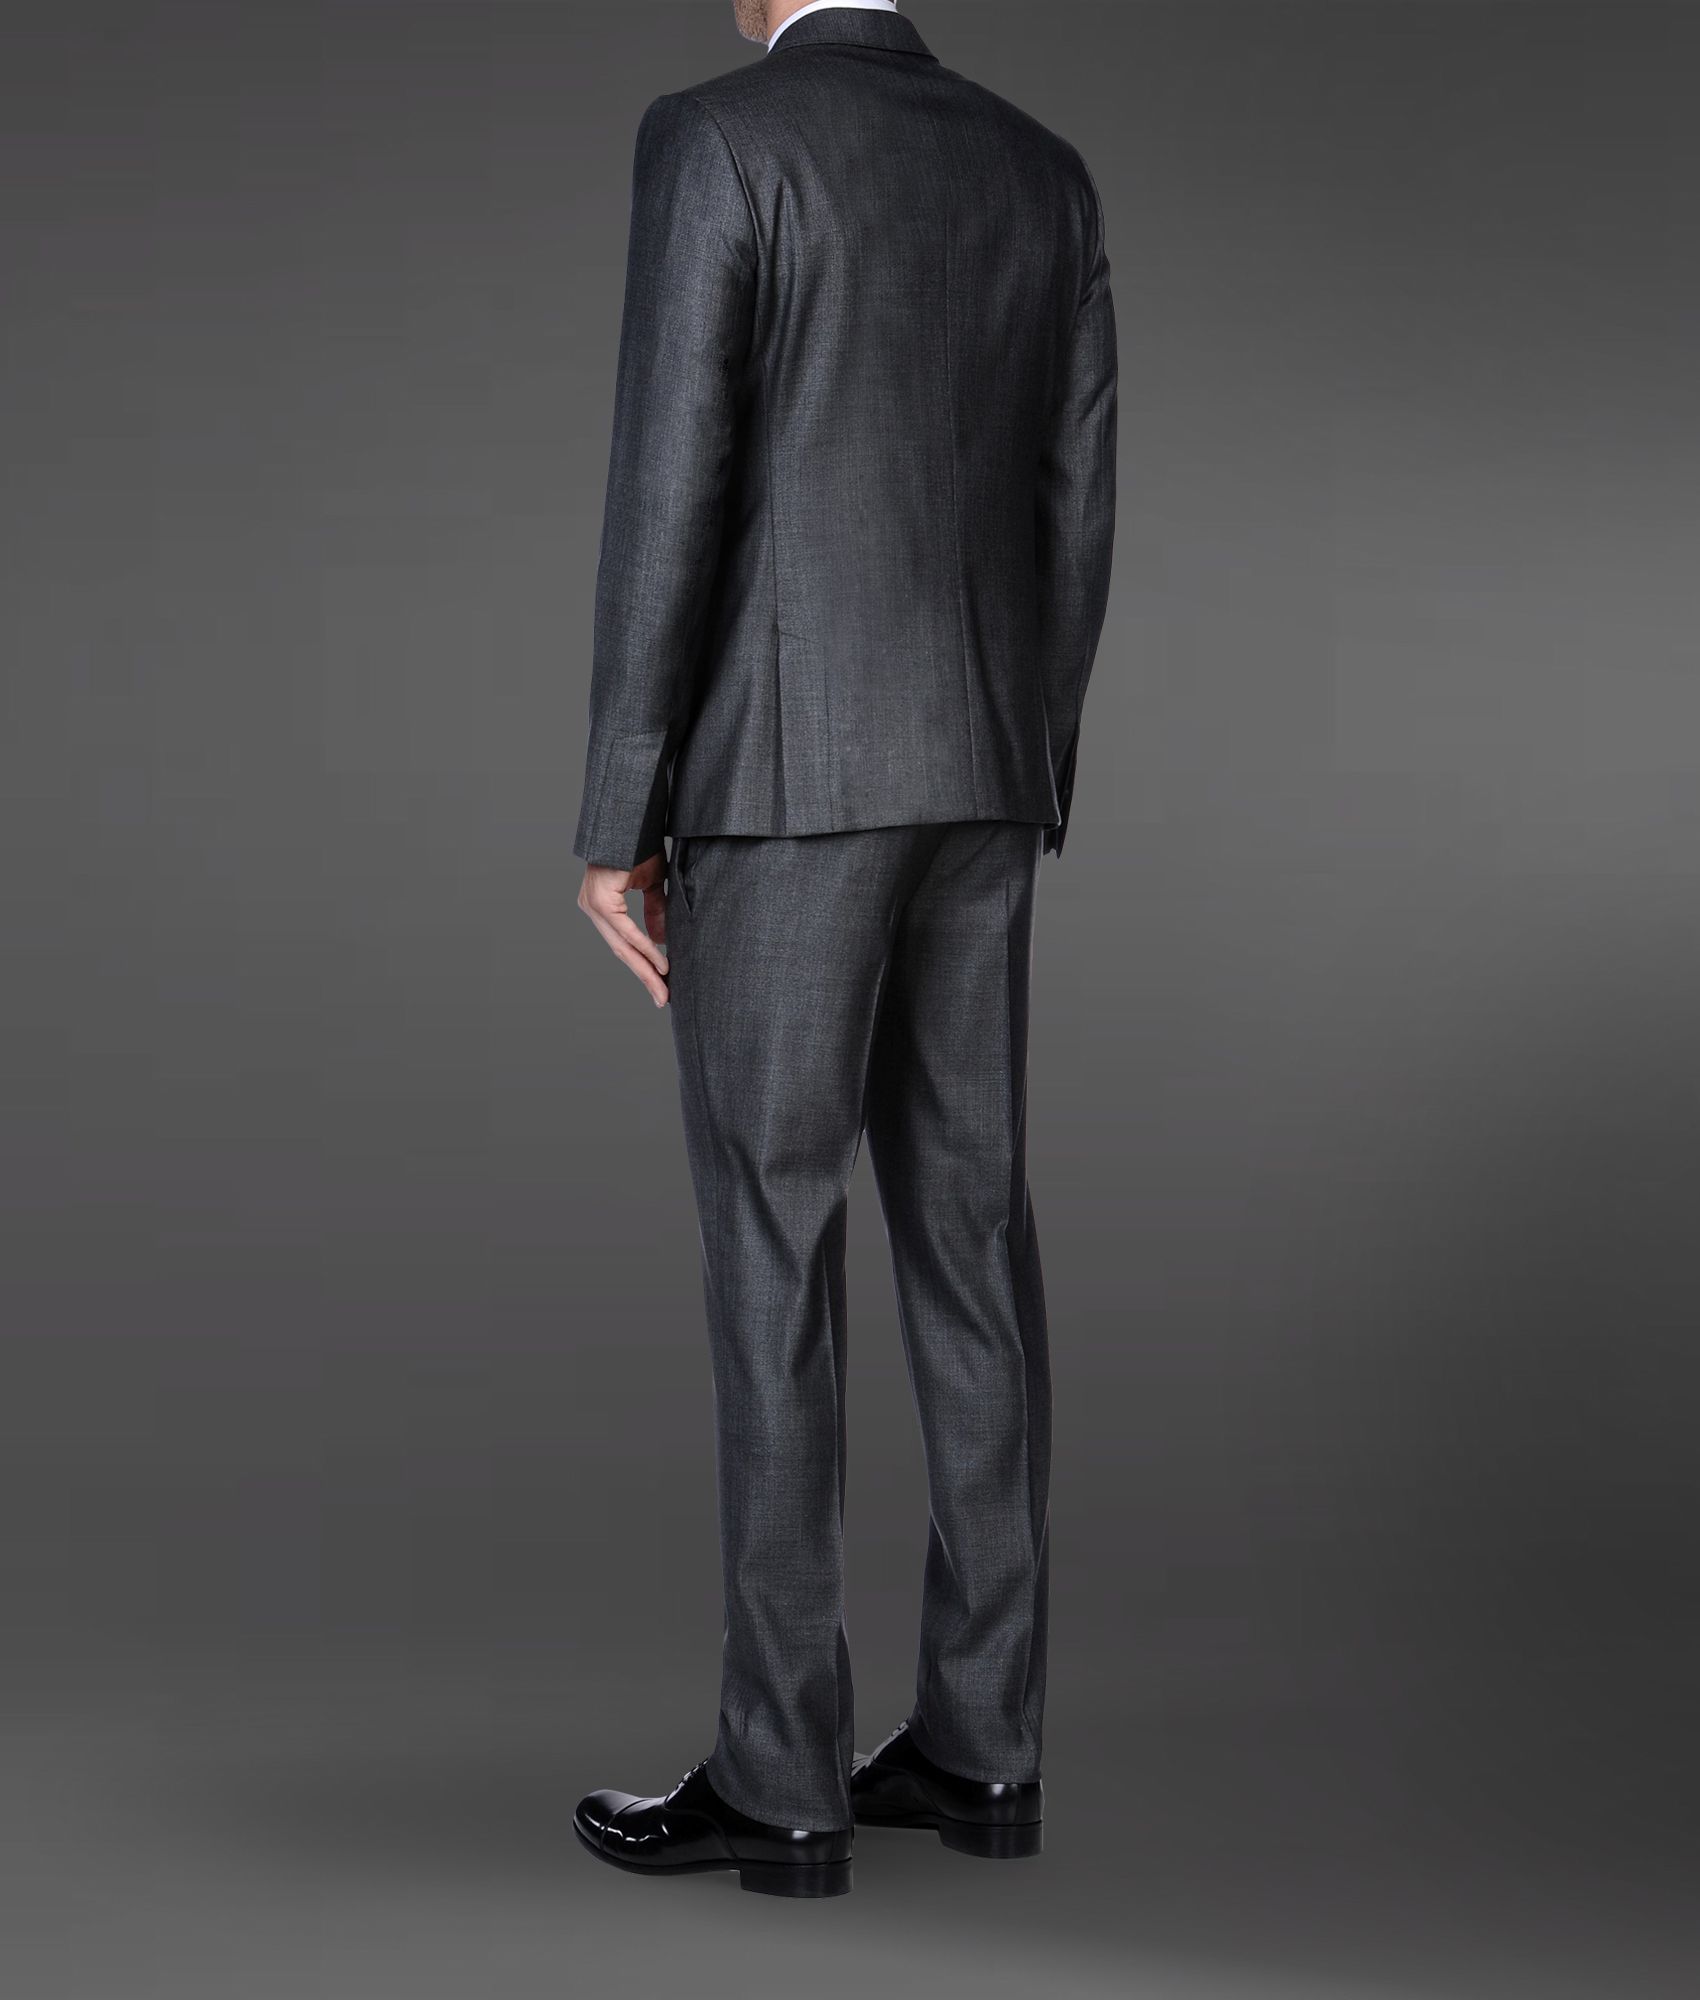 Lyst - Emporio armani Supreme Suit in Stretch Wool and Silk in Gray for Men1700 x 2000